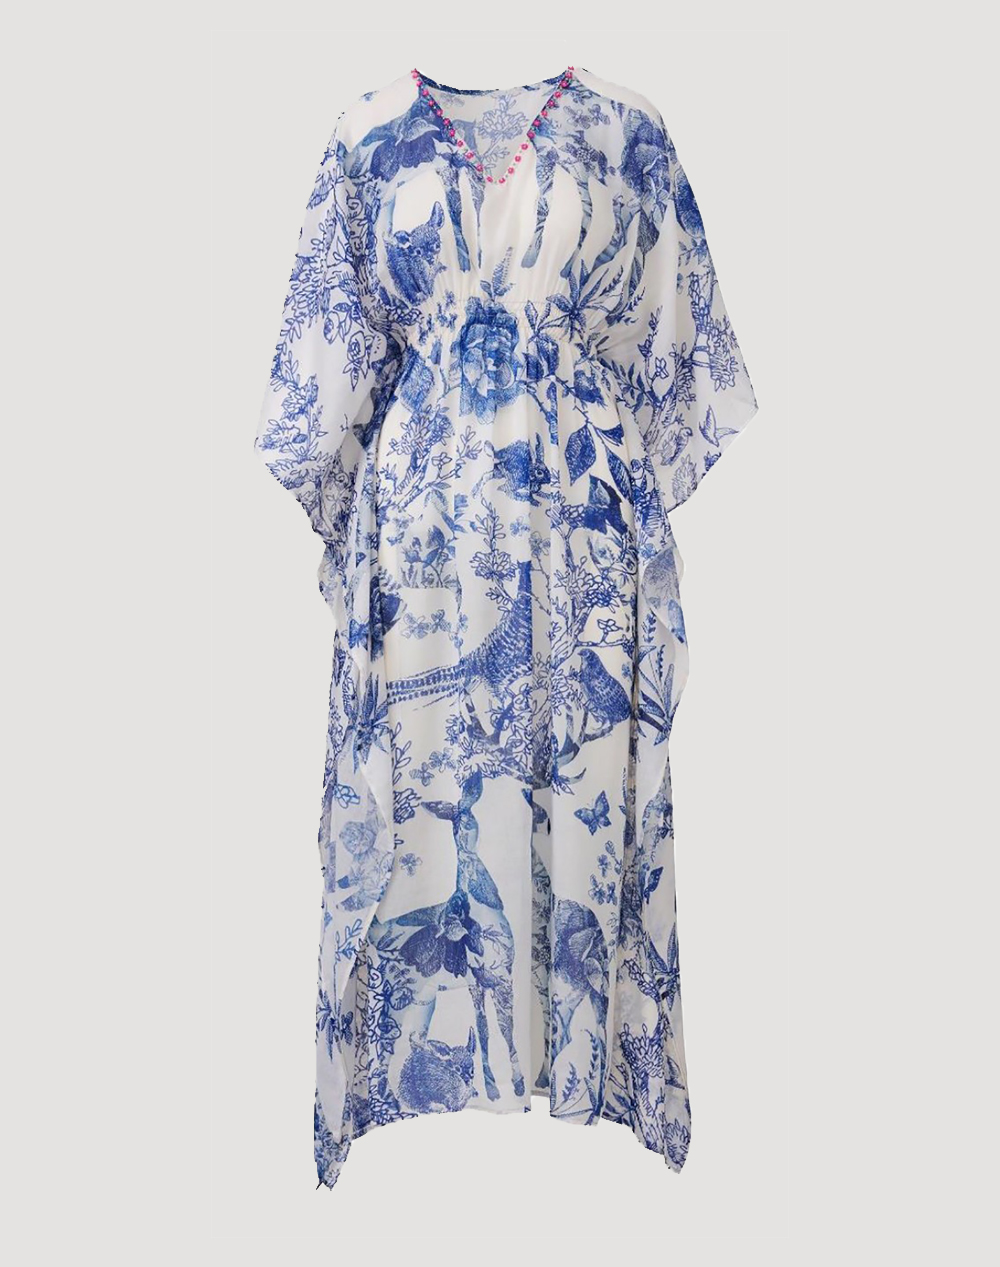 AMOR FOREST BLUE AND WHITE PRINT DRESS